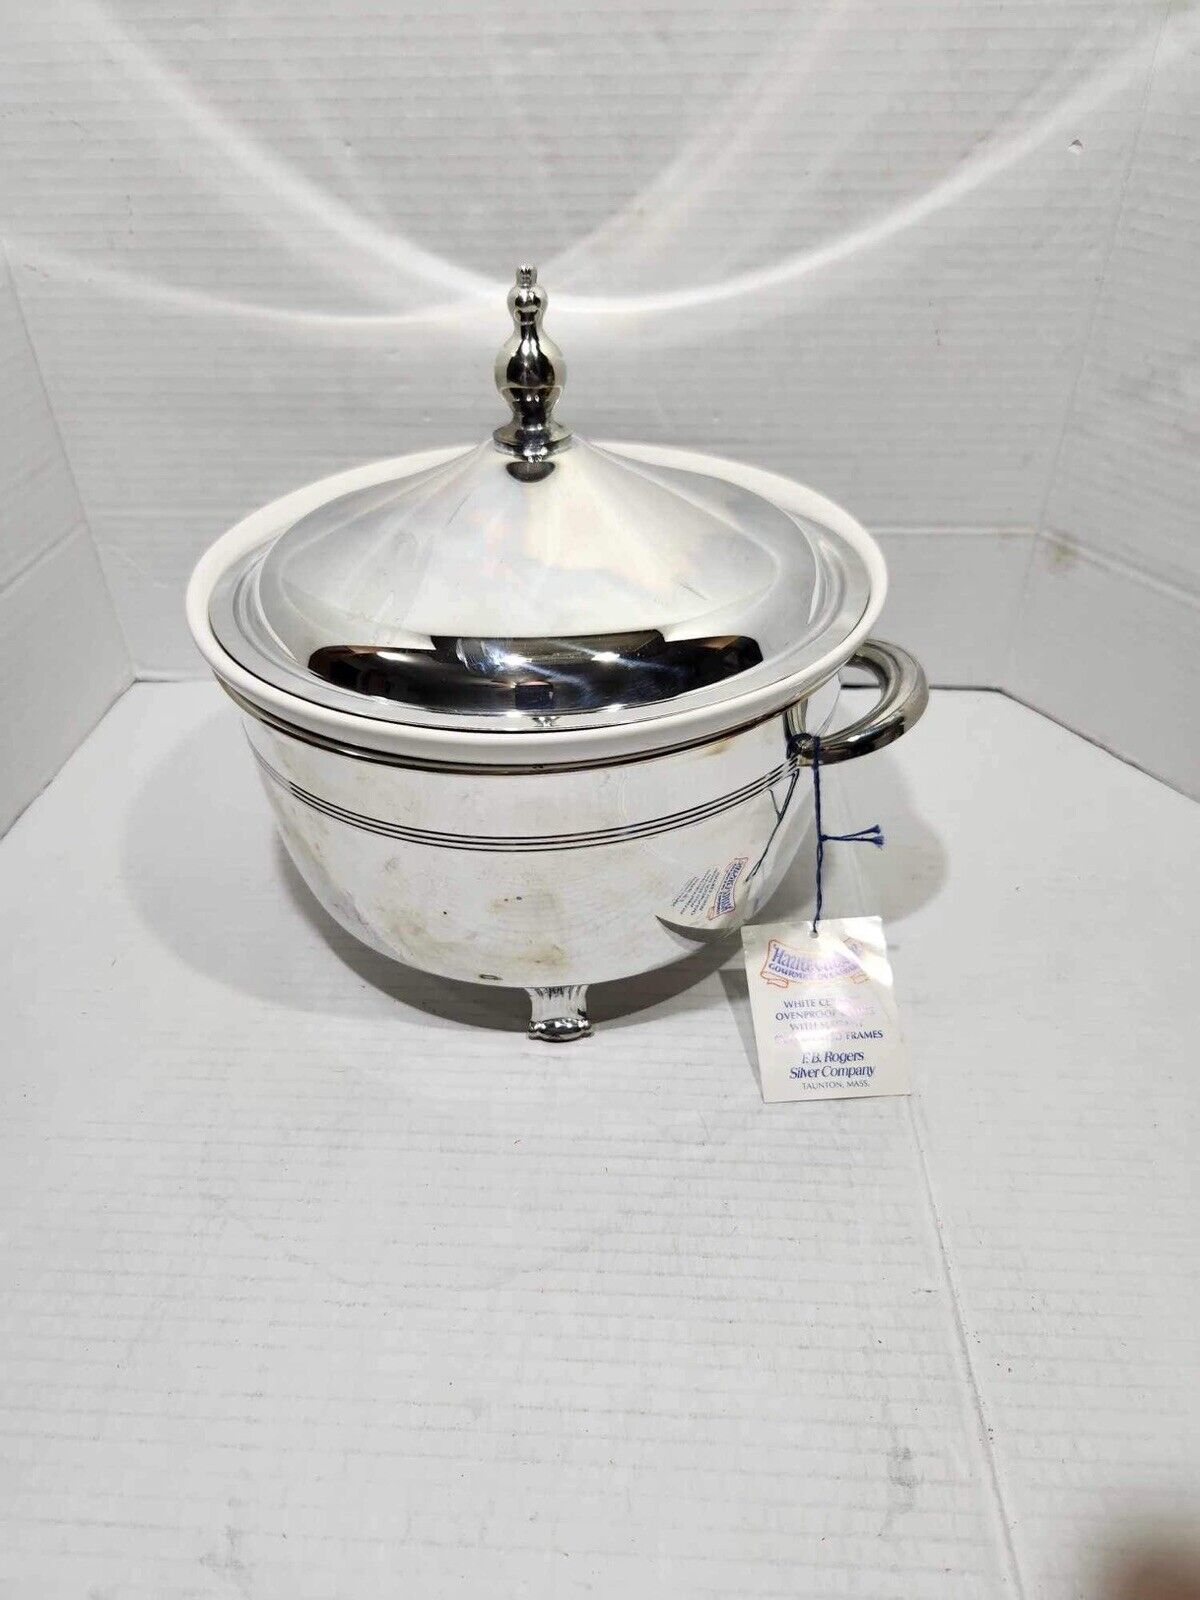 Vtg HAUTE CUISURE GOURMET OVENWARE WITH A FLAIR    F.B. ROGERS SILVER COMPANY